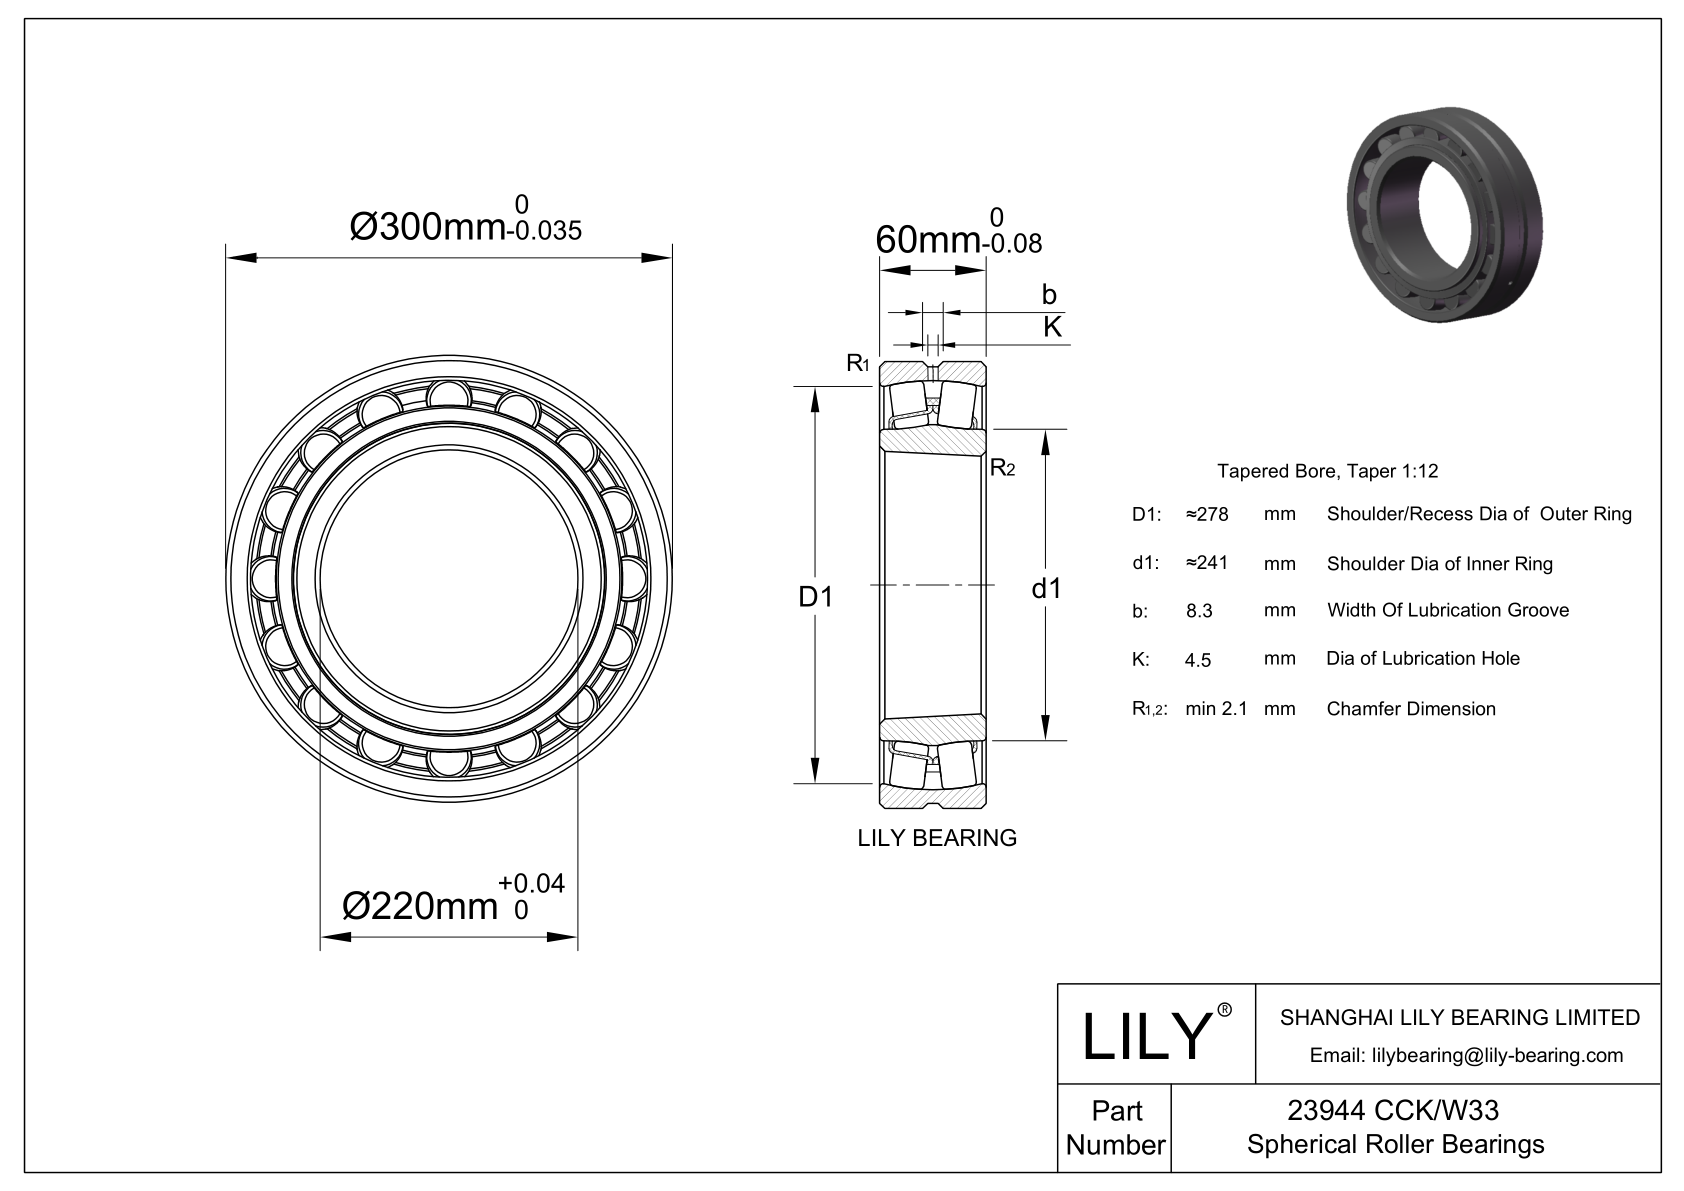 23944 CCK/W33 Double Row Spherical Roller Bearing cad drawing